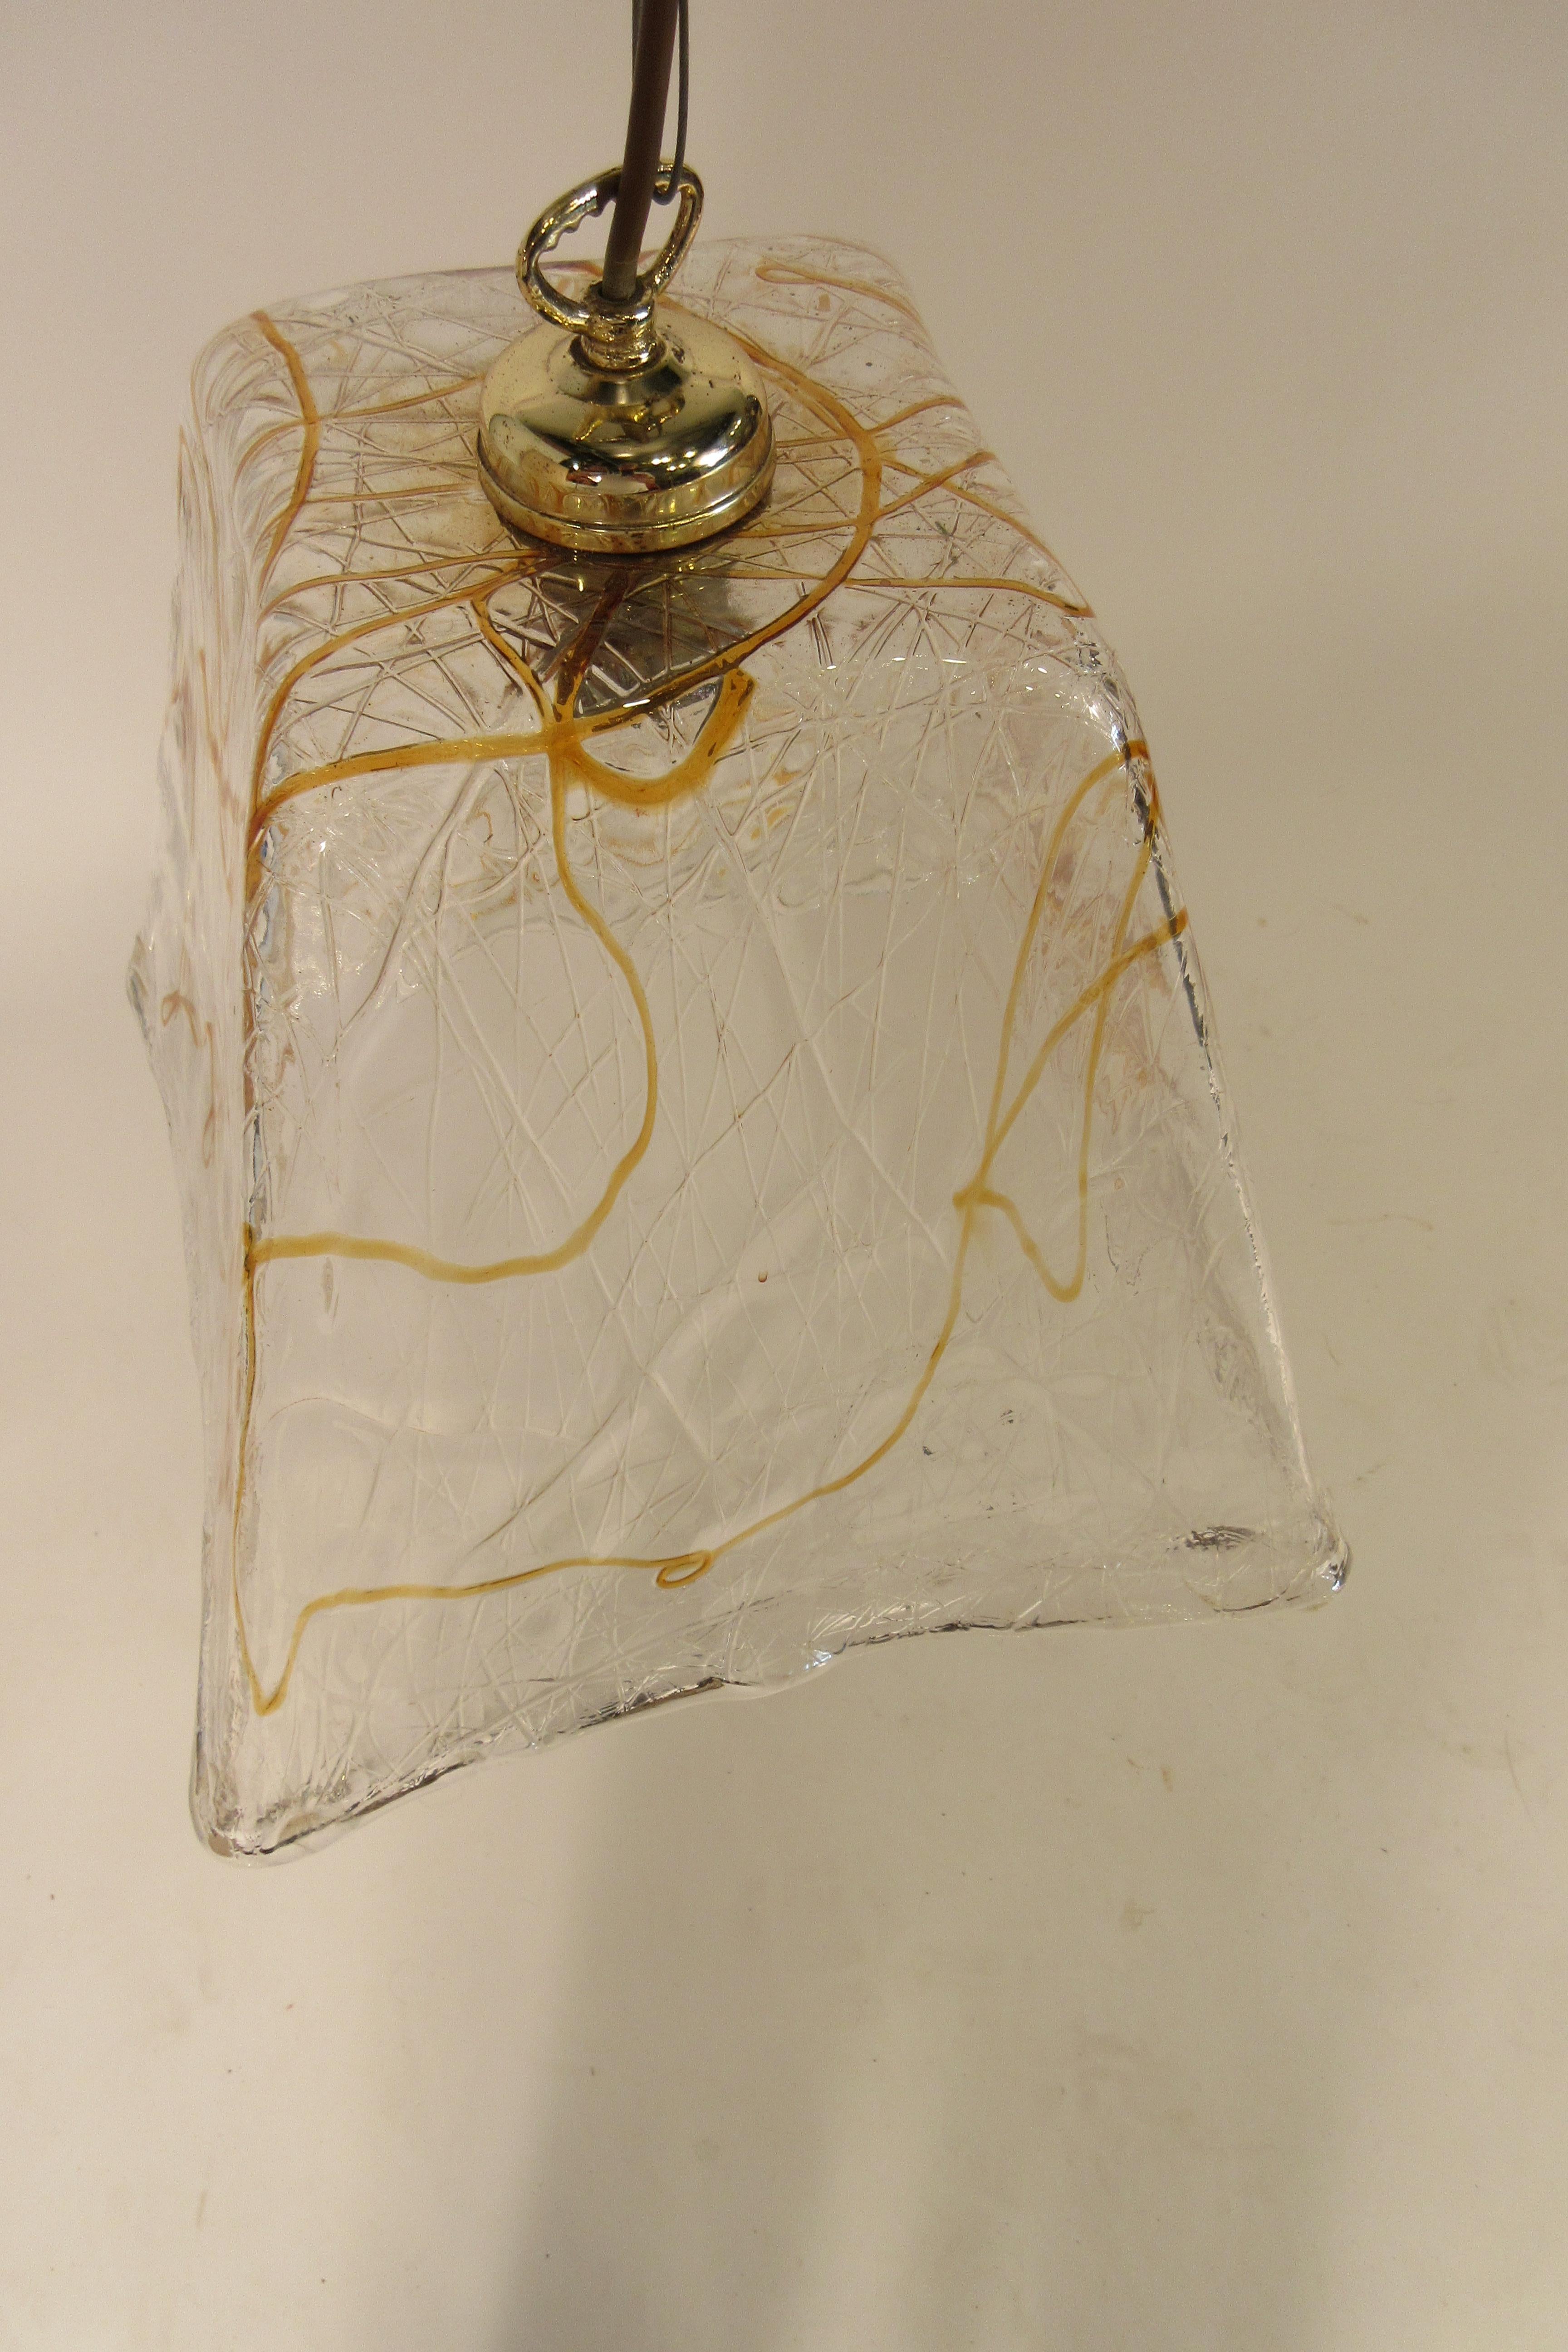 1970s Italian Icicle Glass Fixture with Amber Streaks For Sale 4